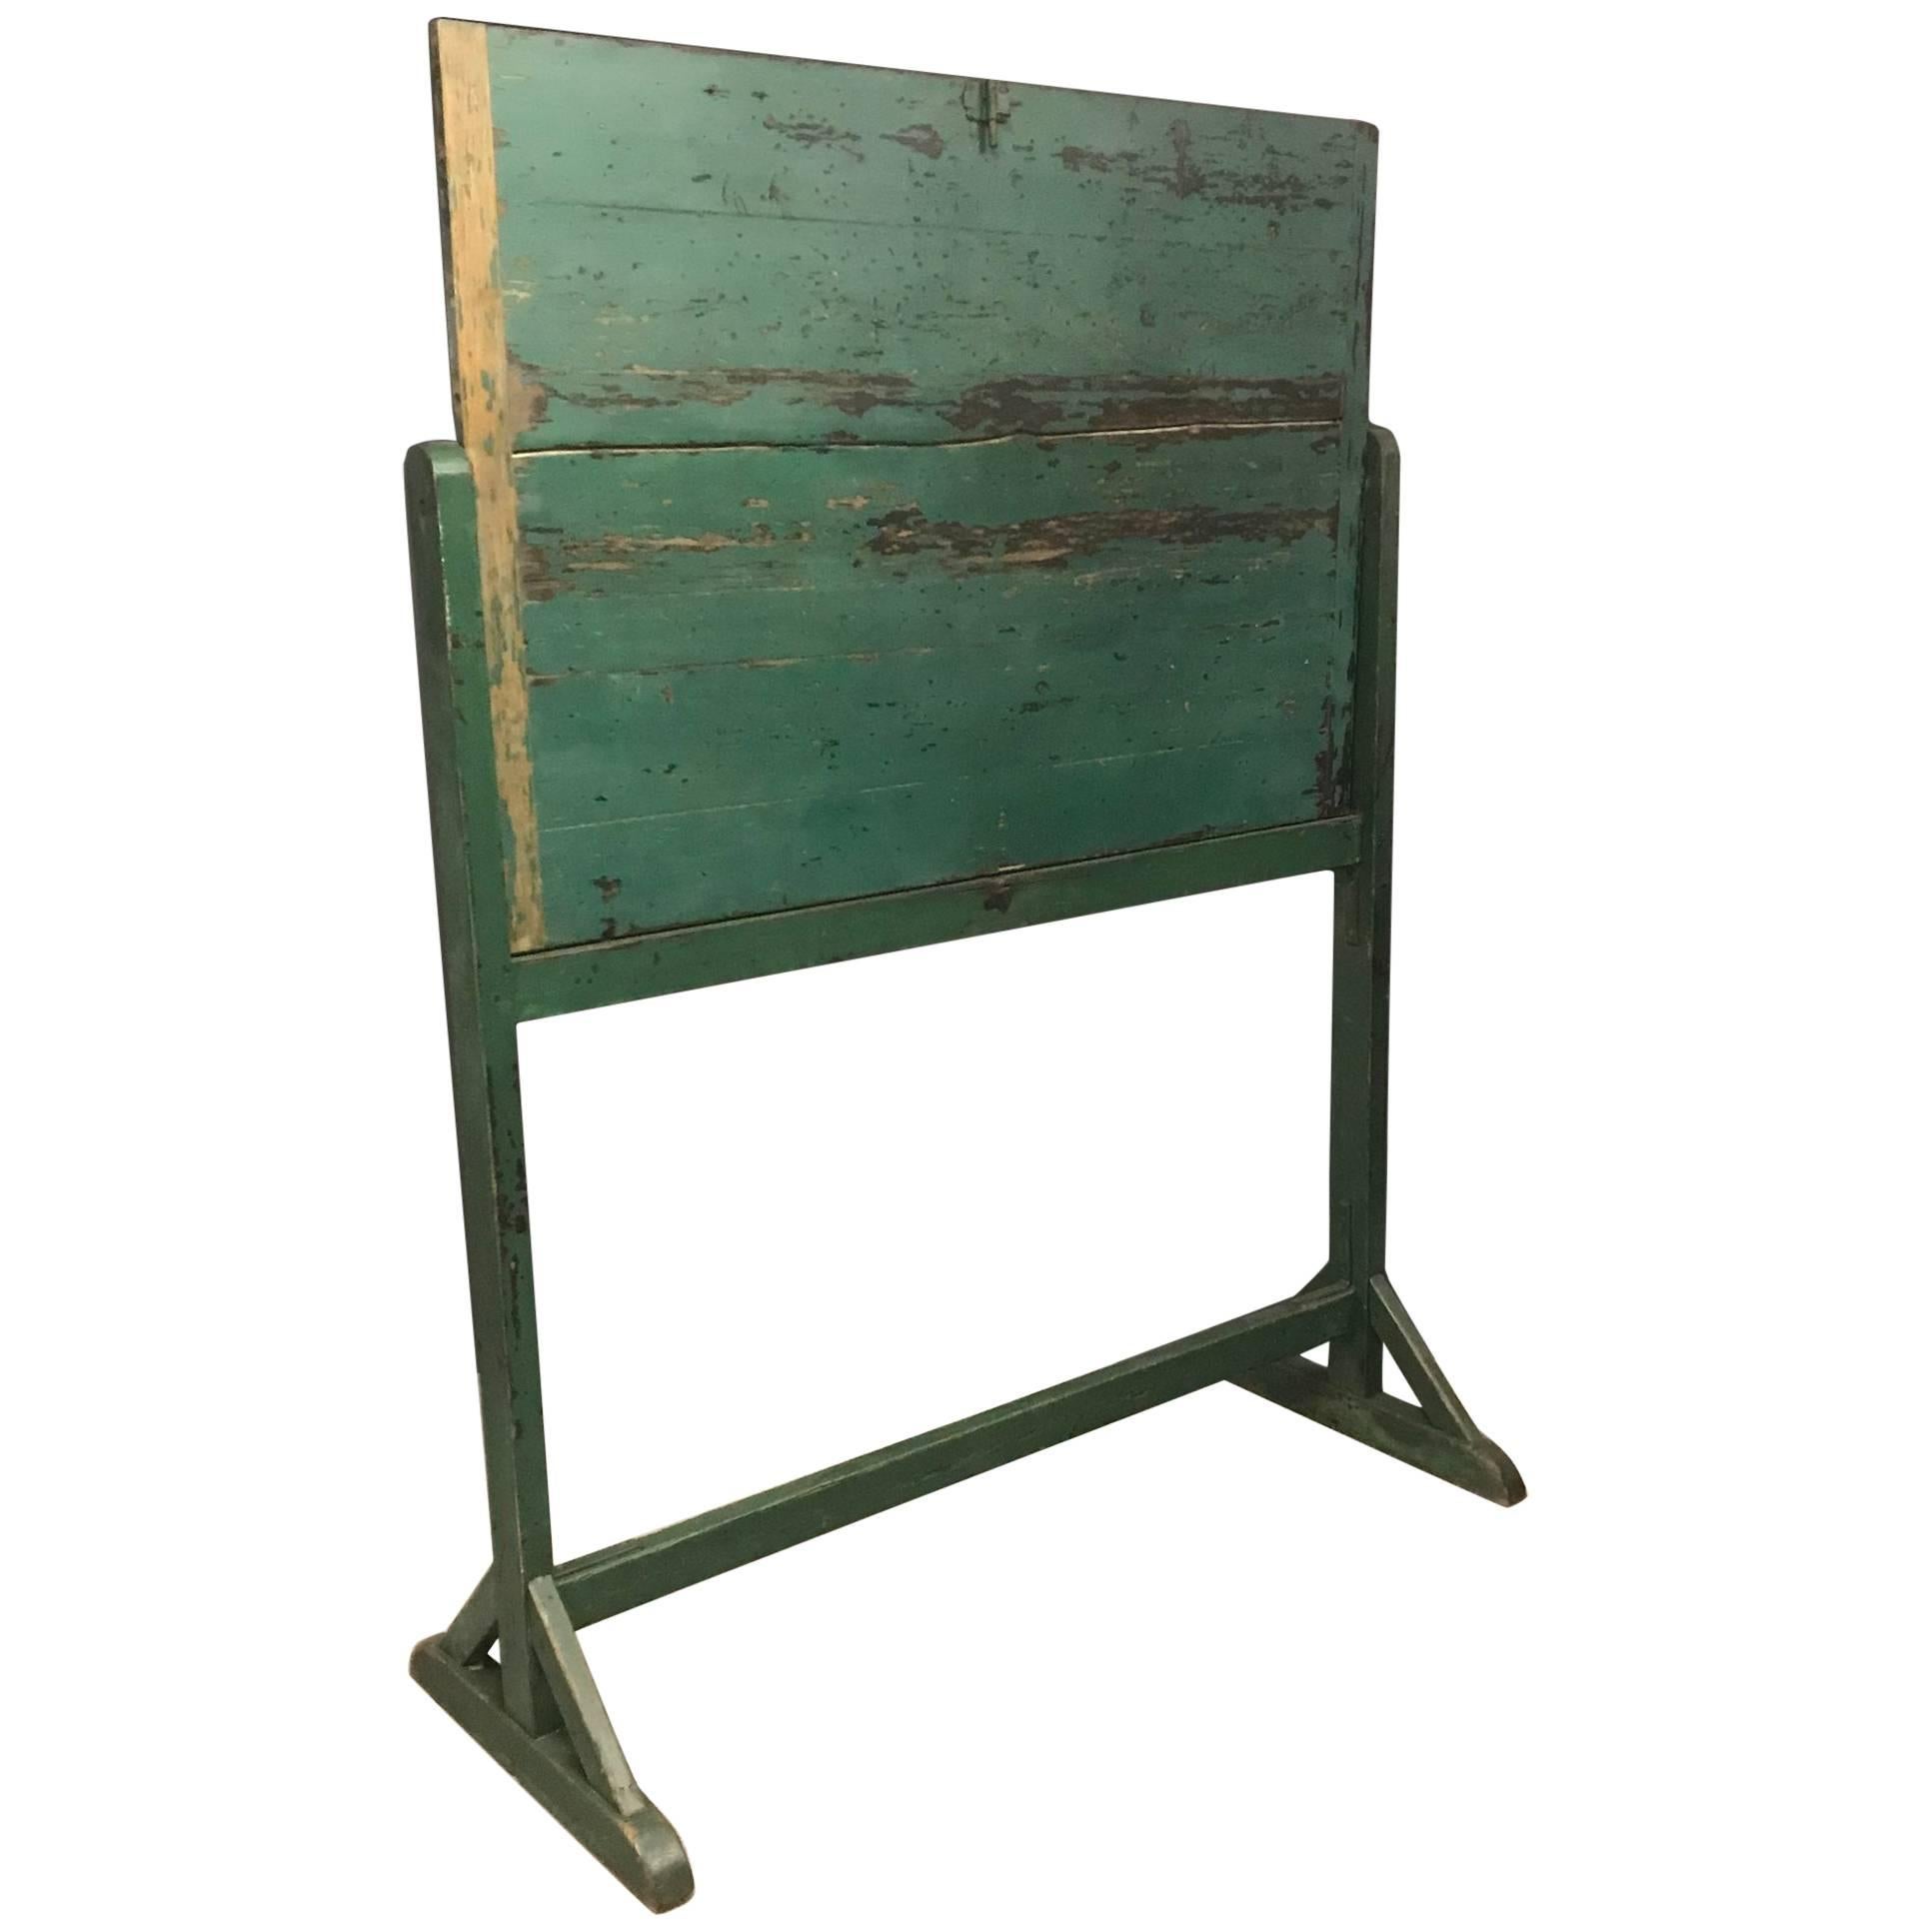 Distressed Green Wooden Rotatable Blackboard For Sale